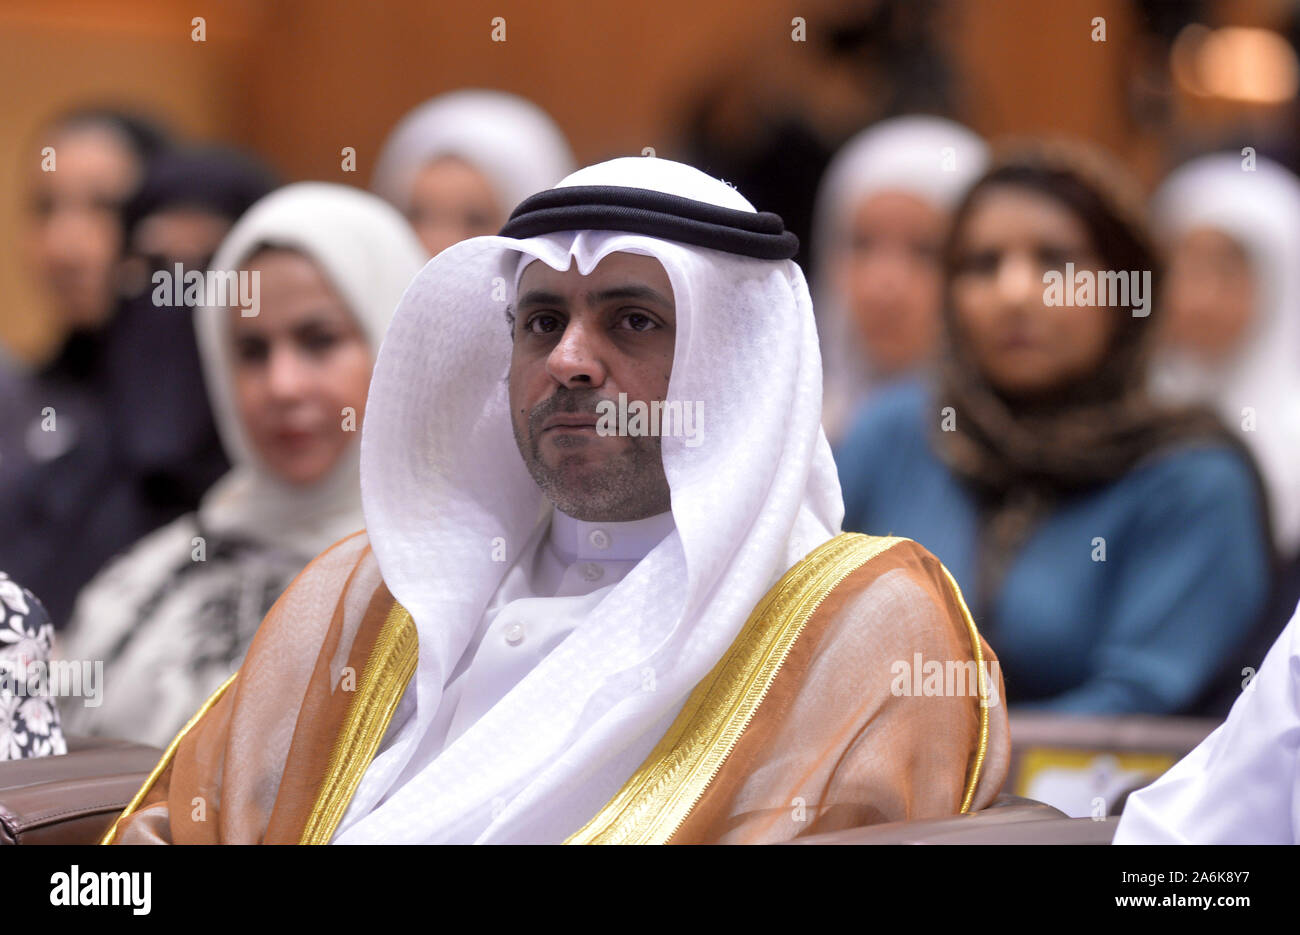 Farwaniya Governorate, Kuwait. 27th Oct, 2019. Kuwaiti Information Minister Mohammad Al-Jabri attends a forum of female journalists in Farwaniya Governorate, Kuwait, Oct. 27, 2019. Kuwaiti Journalists Association (KJA) launched on Sunday a forum of female journalists from across the Gulf region to boost media cooperation in the region. Credit: Asad/Xinhua/Alamy Live News Stock Photo